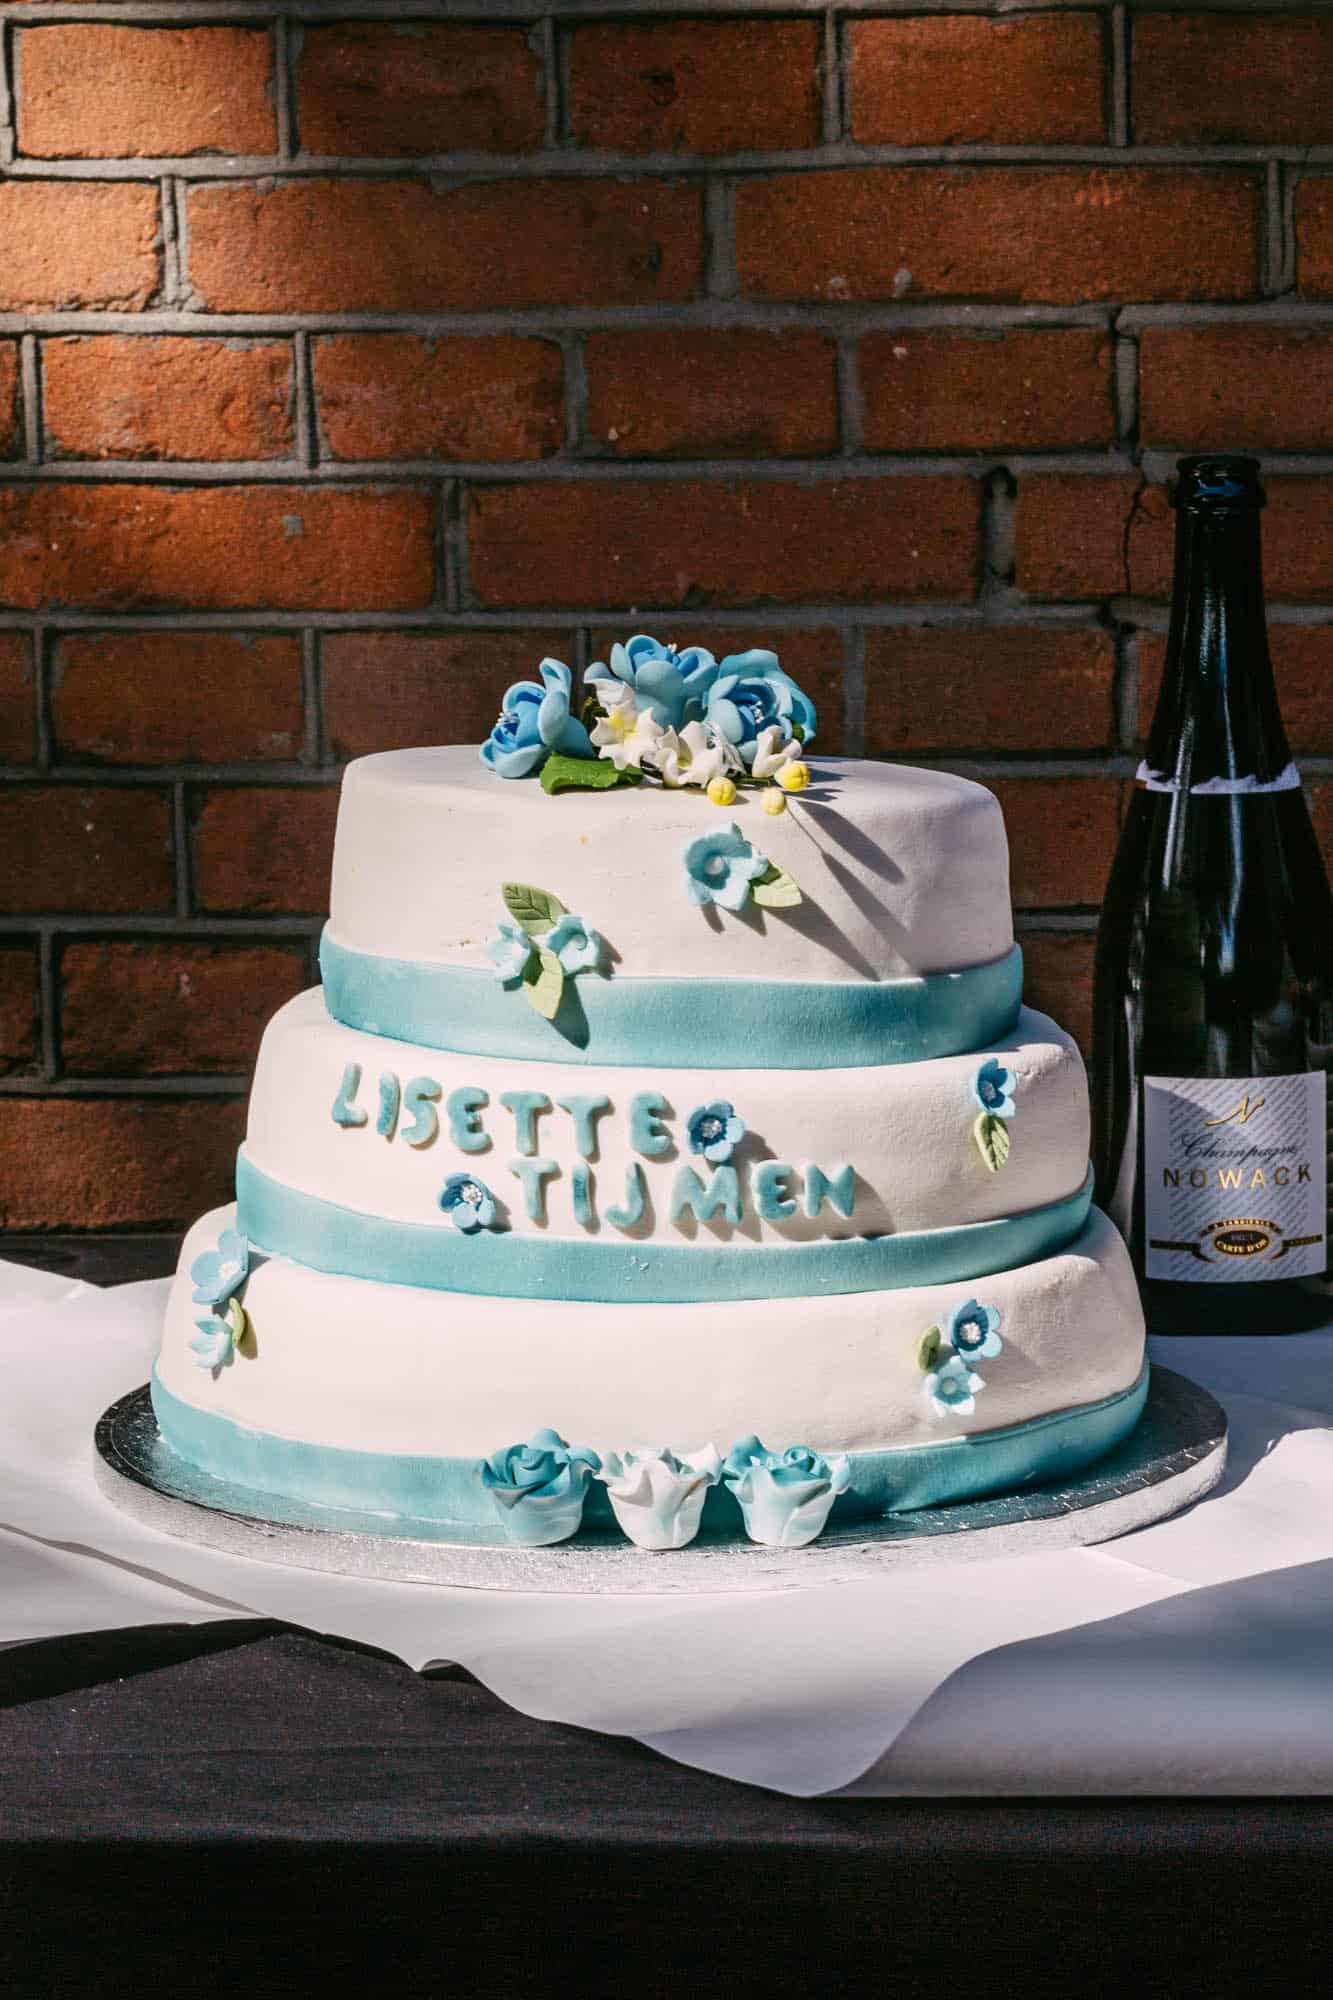 Blue wedding cake with names on it